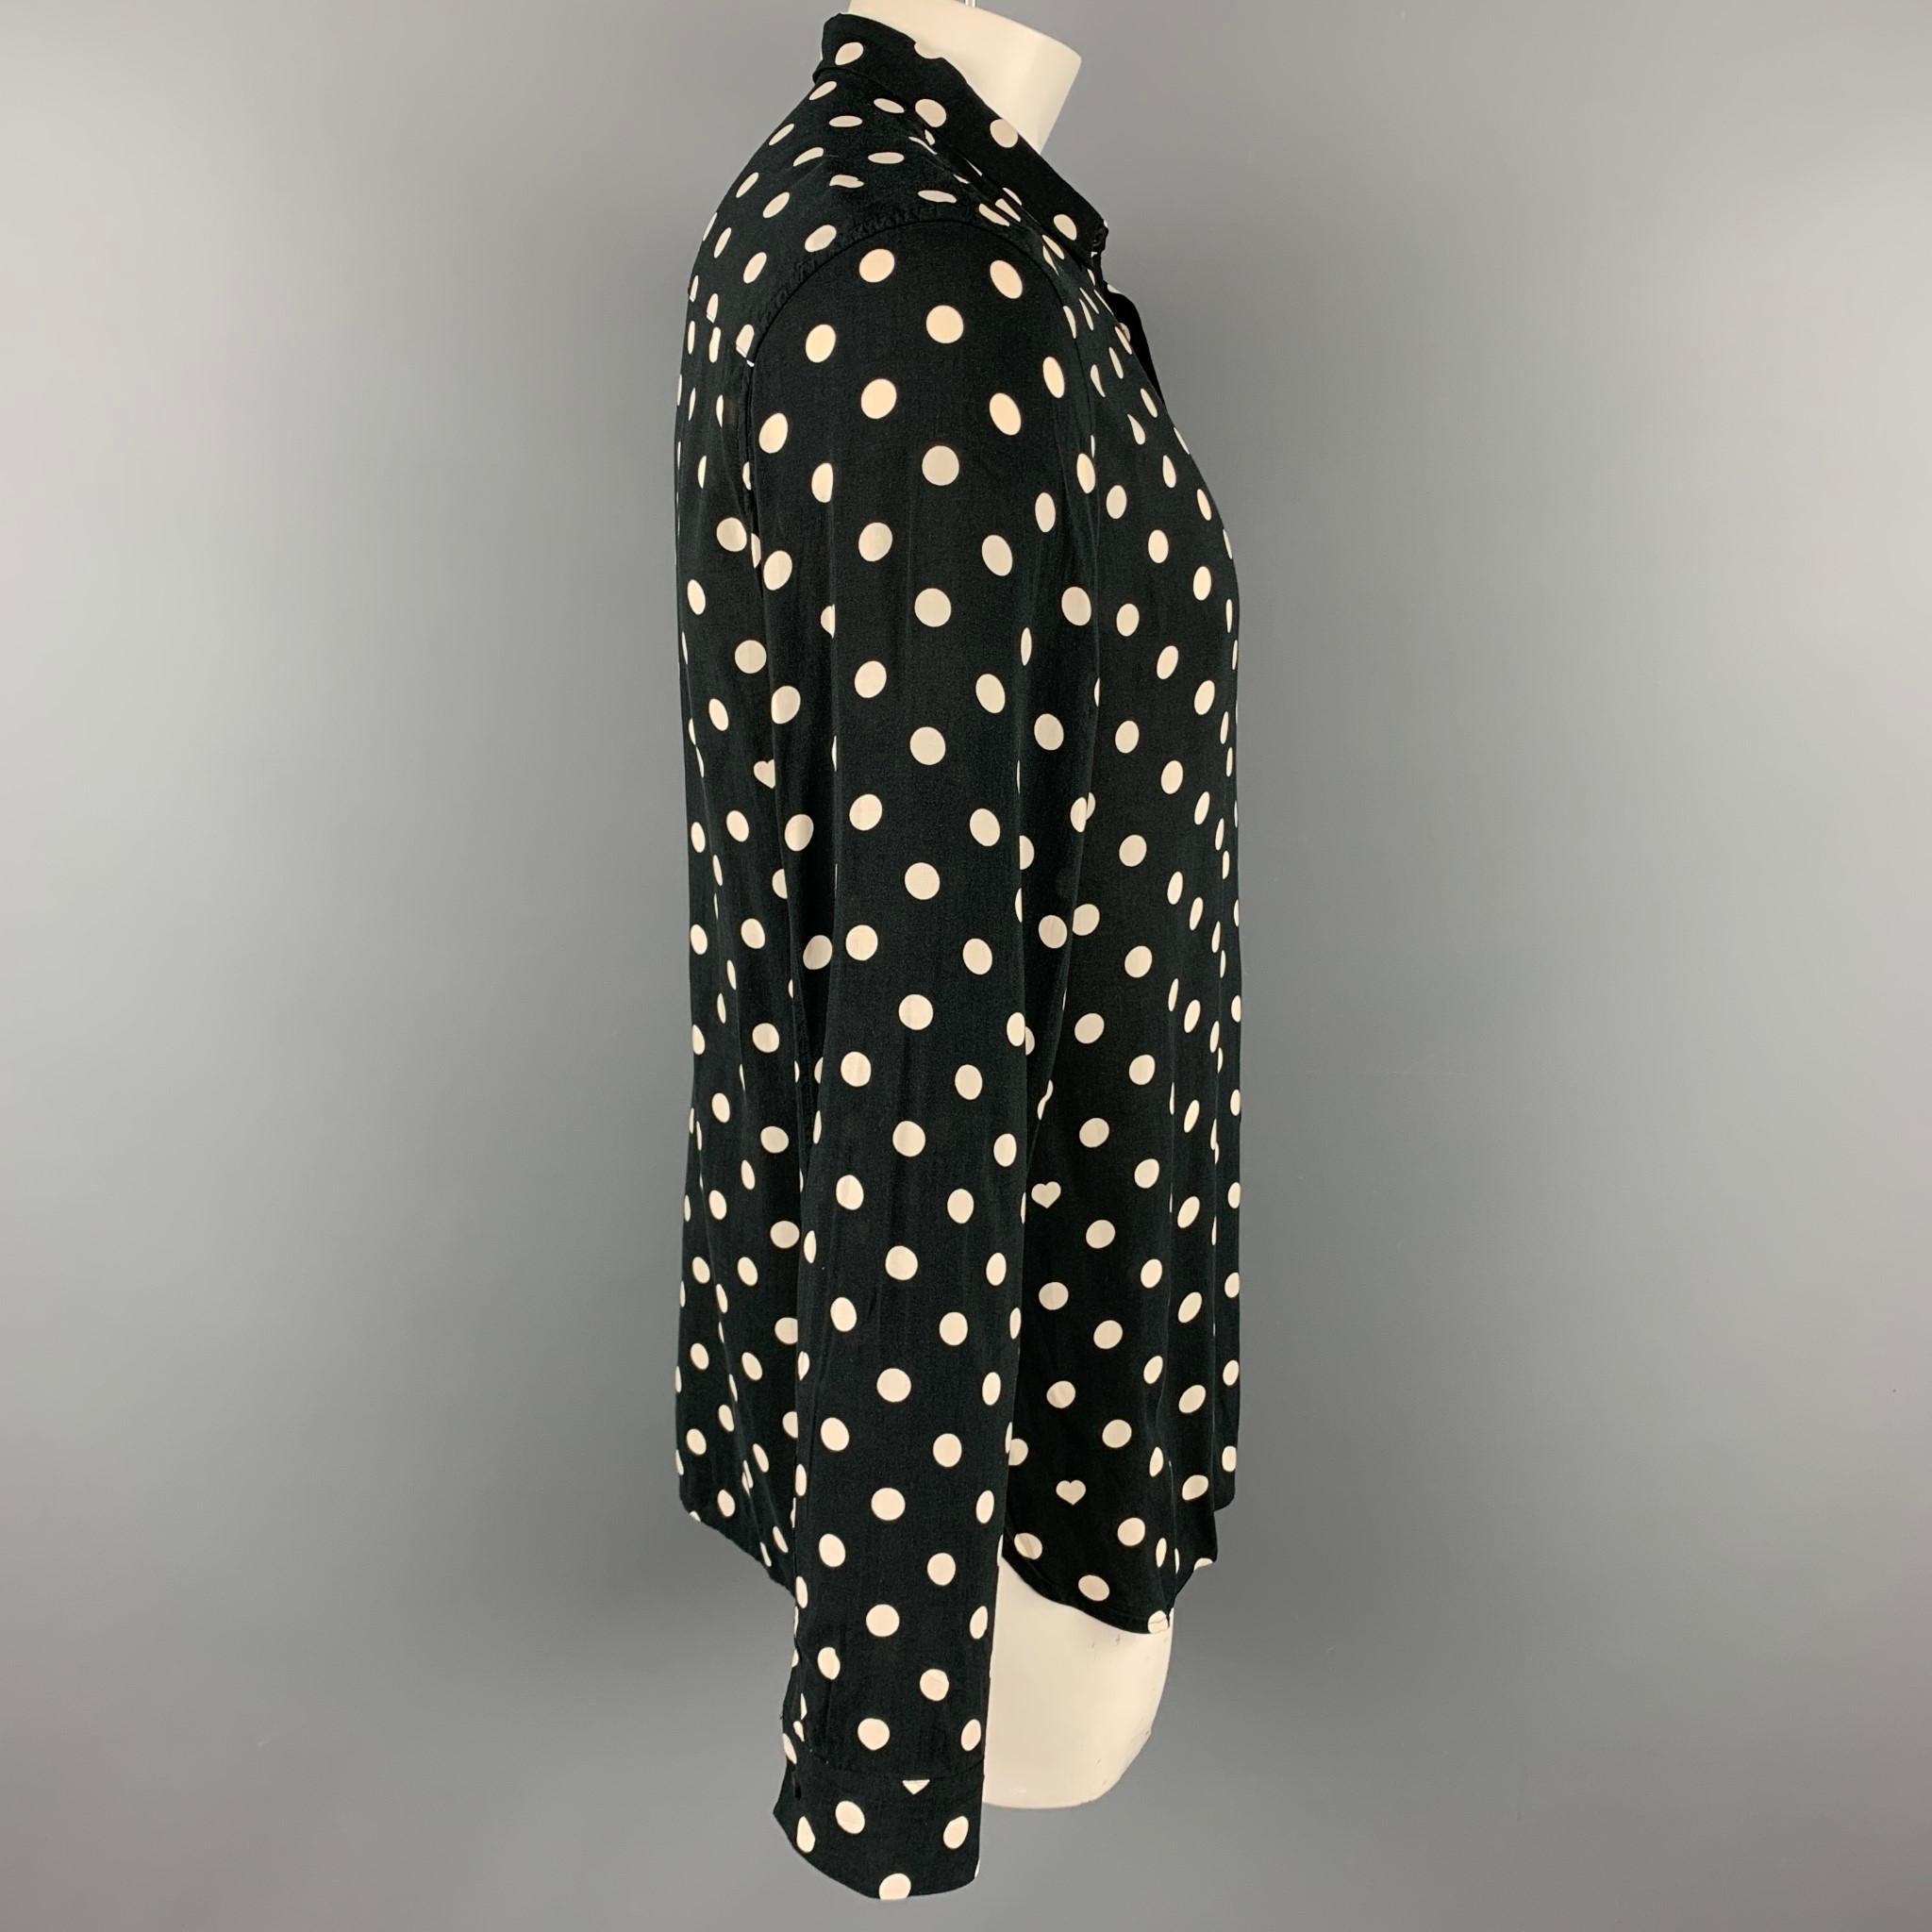 ALLSAINTS long sleeve shirt comes in a black & white polka dot viscose featuring a button up style and a spread collar.

Good Pre-Owned Condition.
Marked: XL

Measurements:

Shoulder: 19 in.
Chest: 44 in.
Sleeve: 28 in.
Length: 30.5 in. 